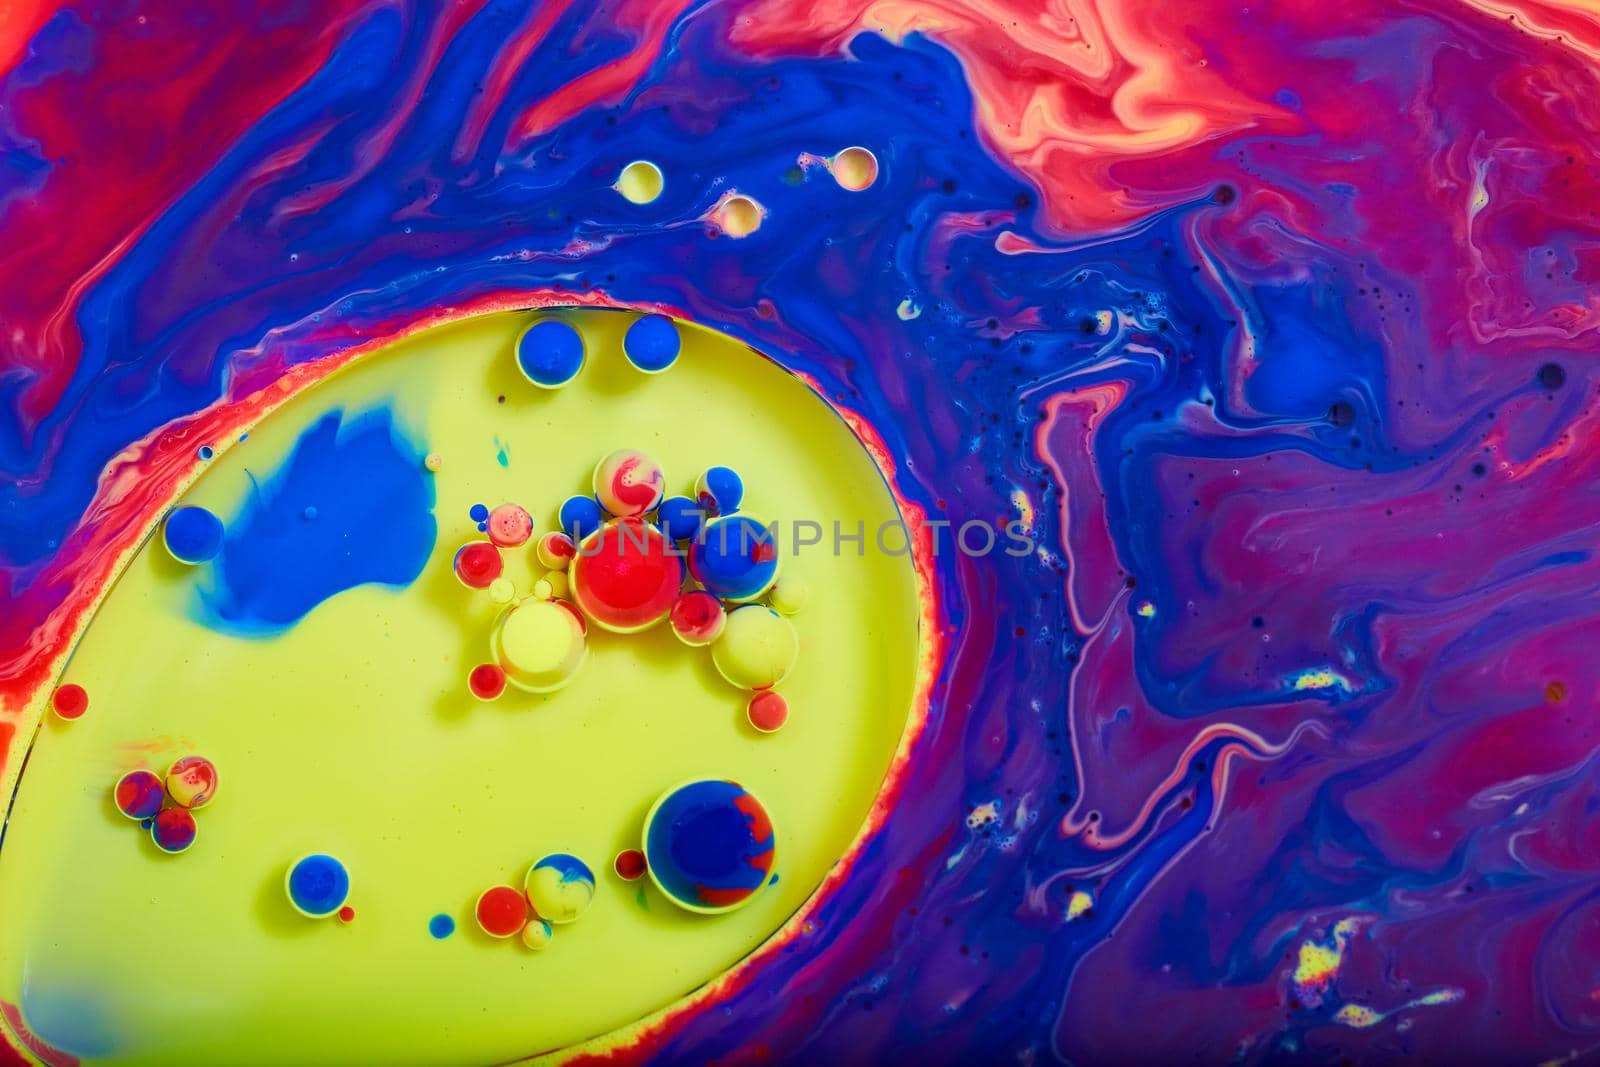 Multicolored surface with circle of yellow and tiny spheres of red, blue, and yellow by njproductions